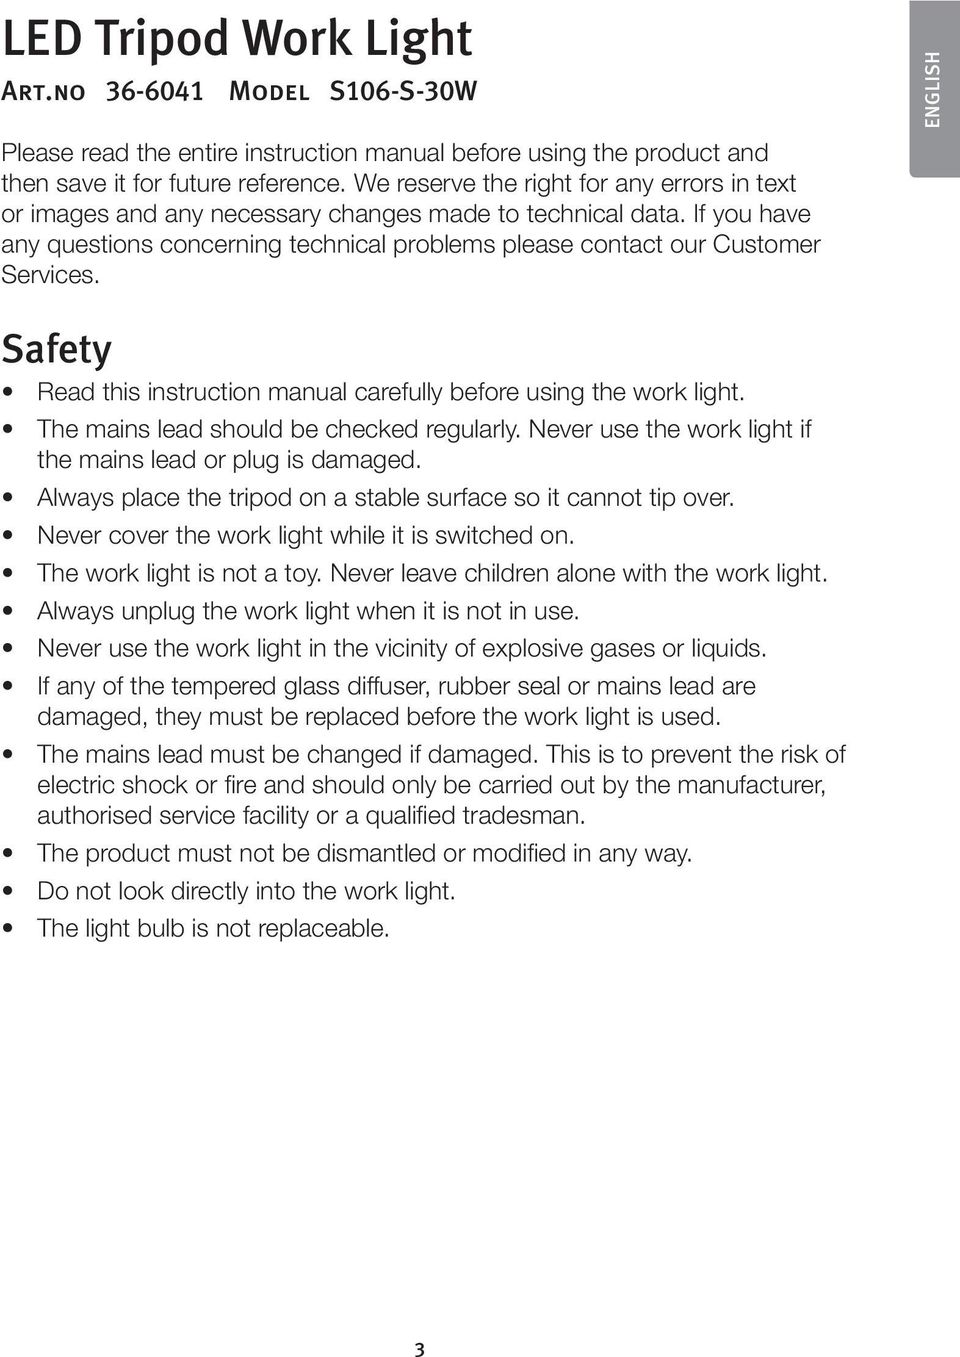 ENGLISH Safety Read this instruction manual carefully before using the work light. The mains lead should be checked regularly. Never use the work light if the mains lead or plug is damaged.